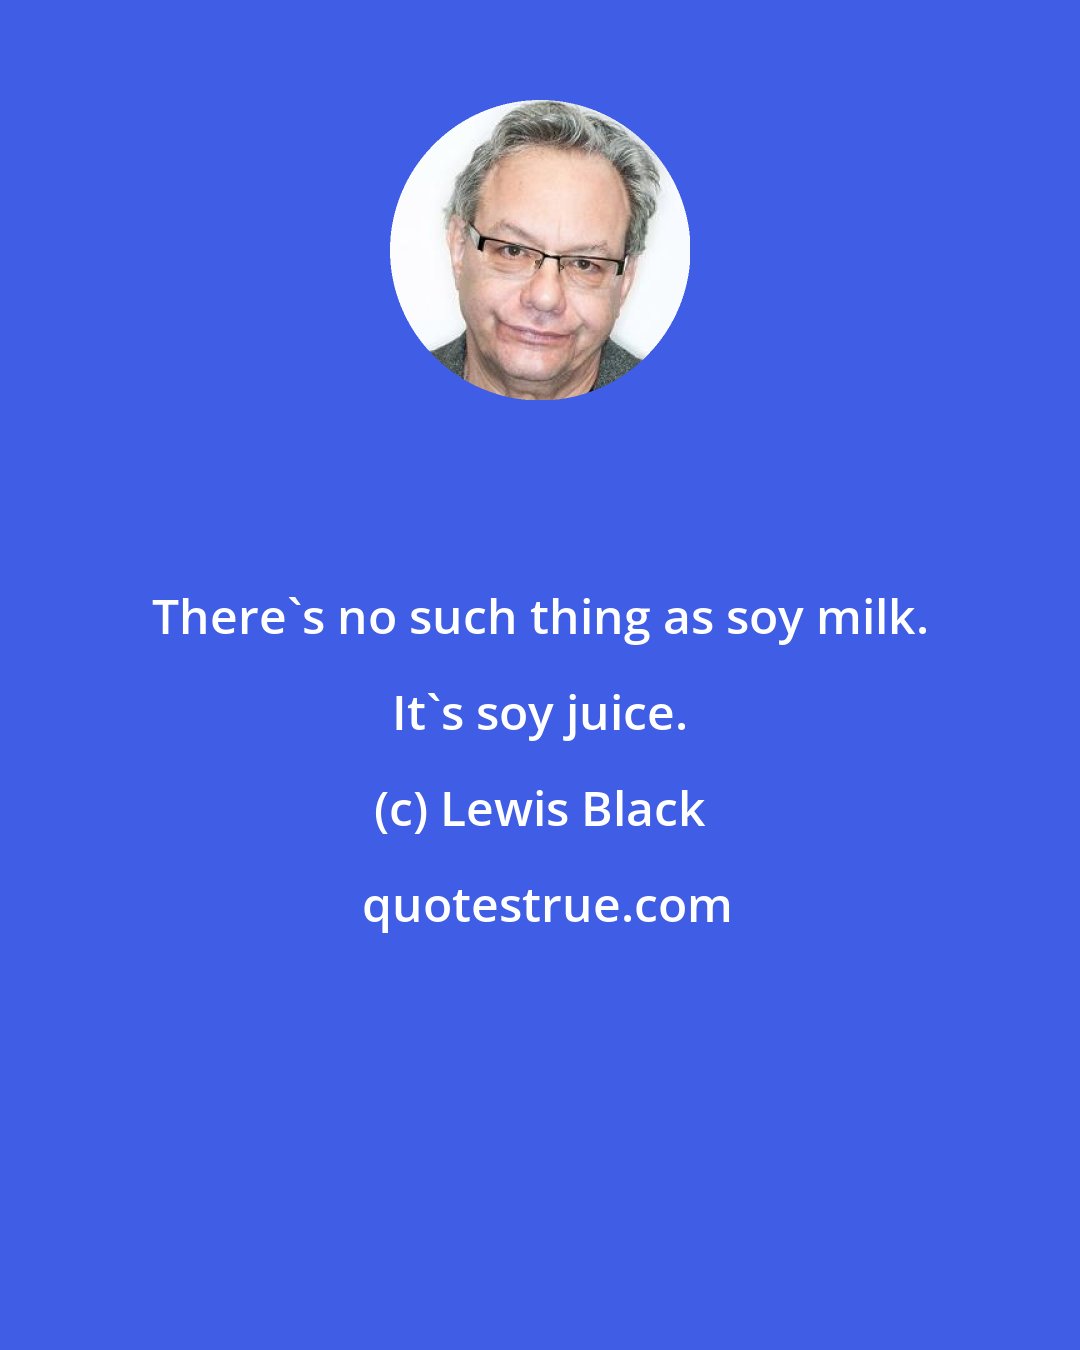 Lewis Black: There's no such thing as soy milk. It's soy juice.